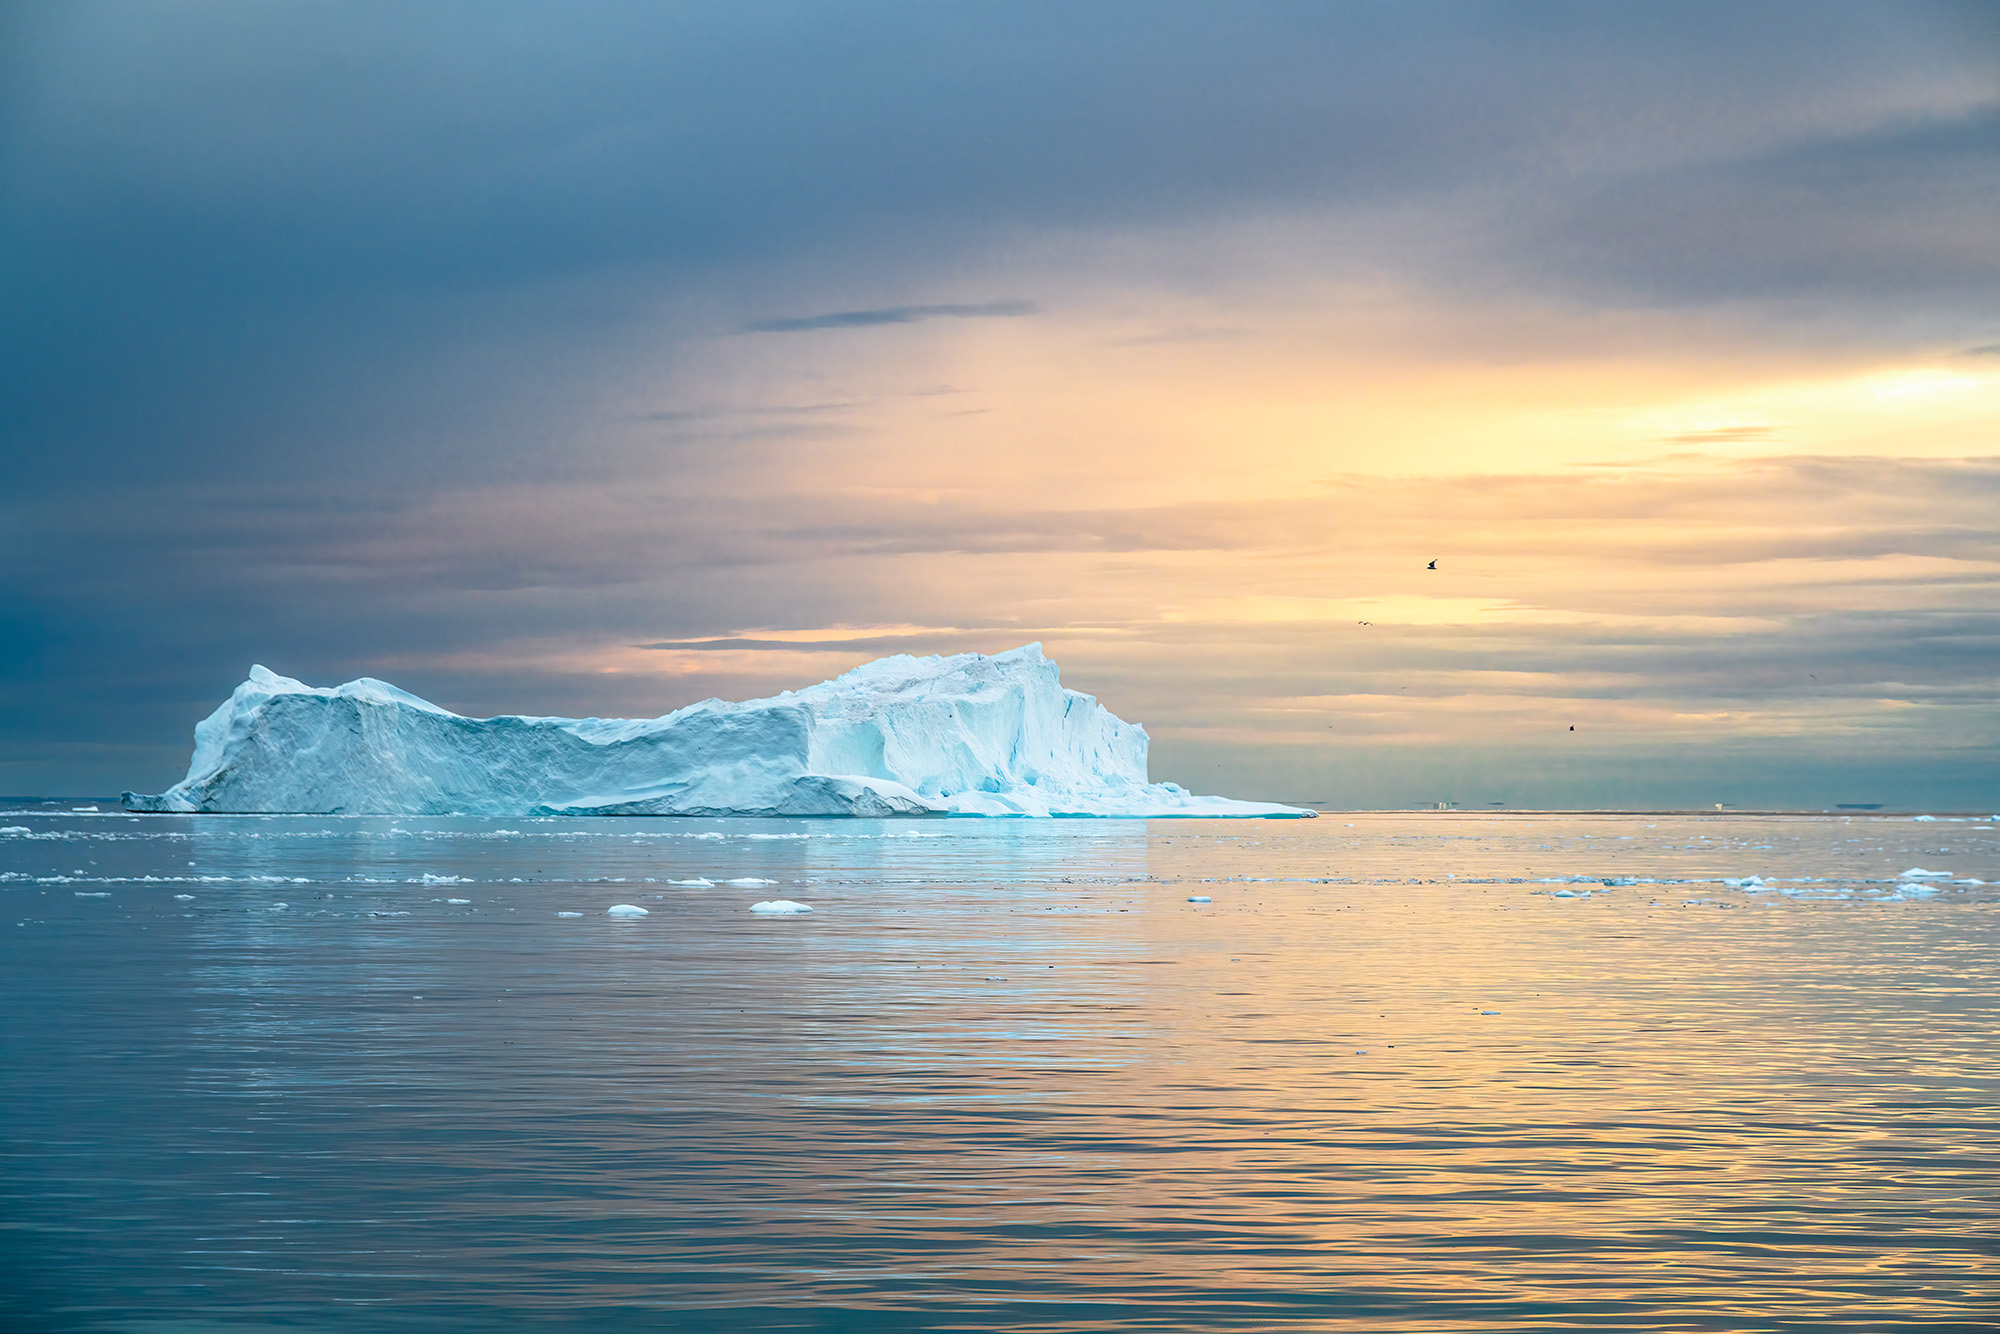 Among the images I captured in July in Disko Bay, Greenland, this one truly embodies the essence of the phrase "midnight sun."...